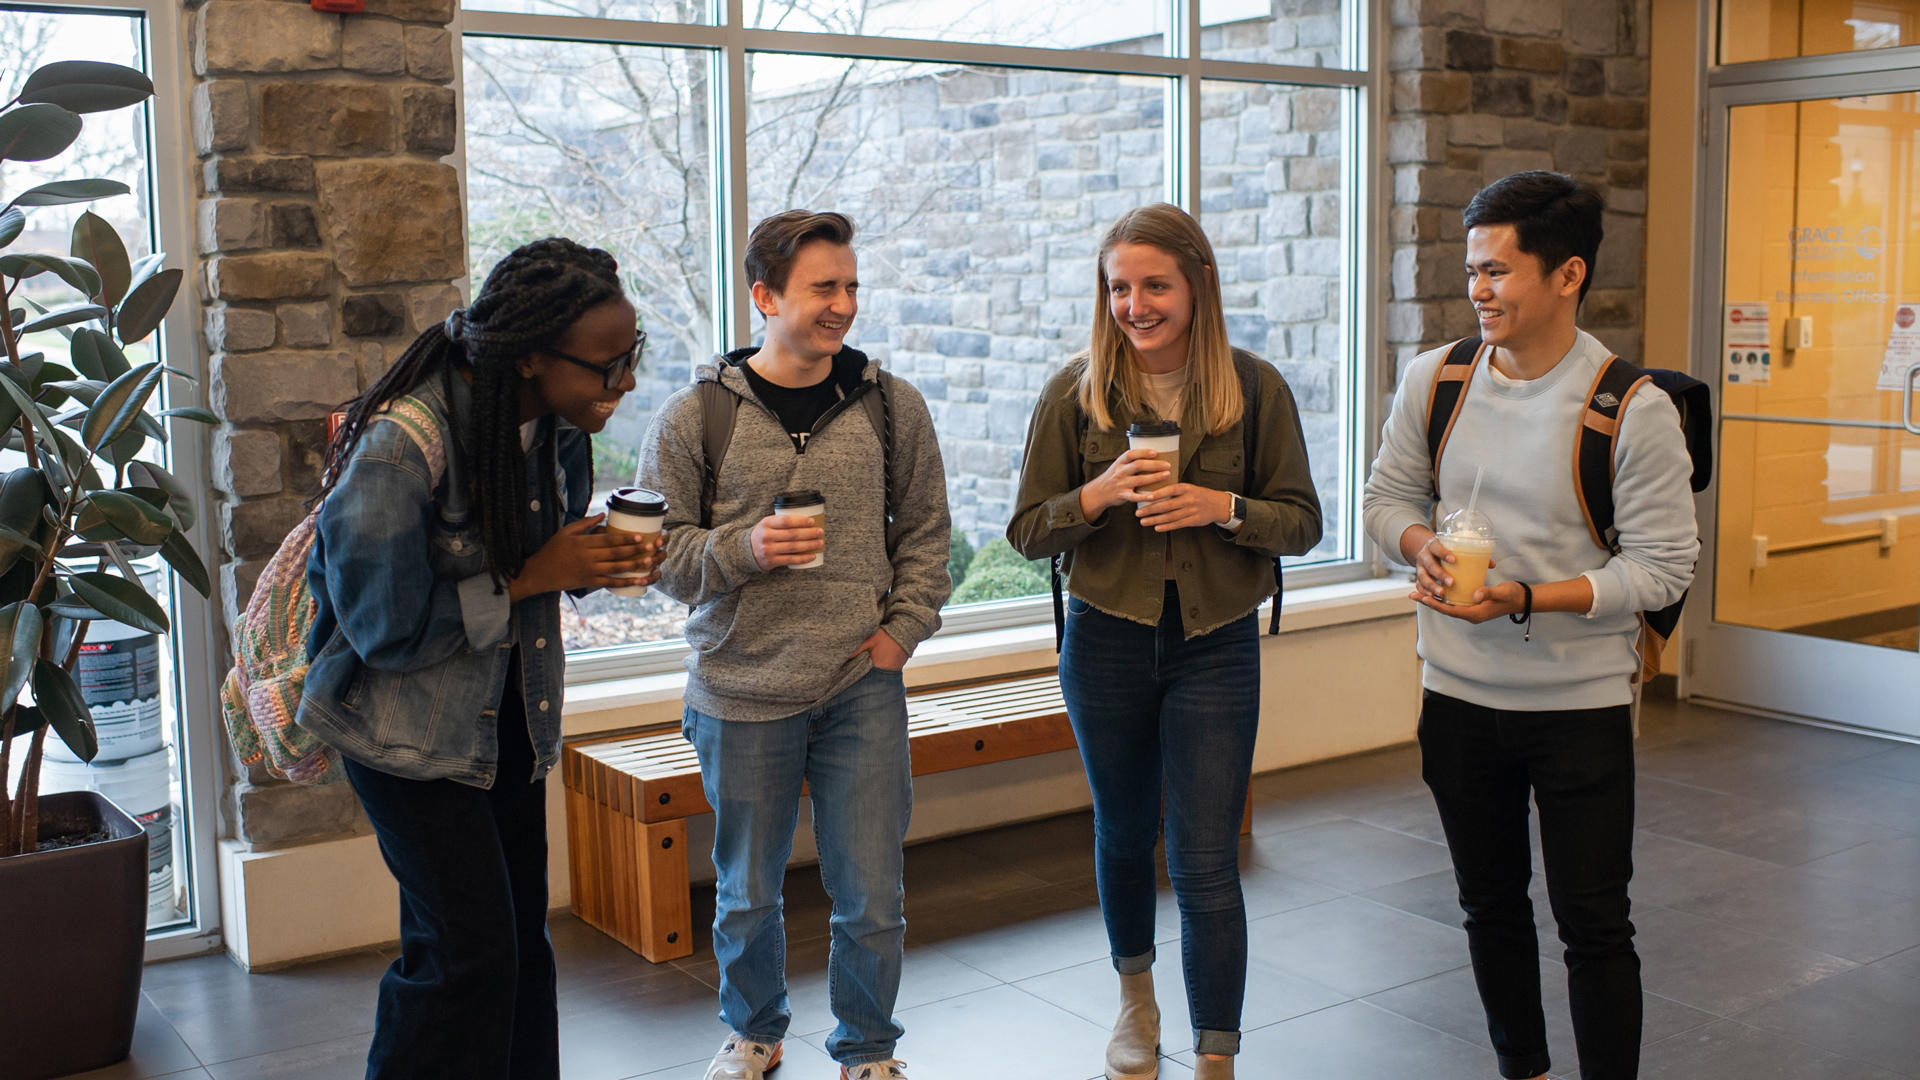 A diverse group of Grace students laughing and talking in the Commons.